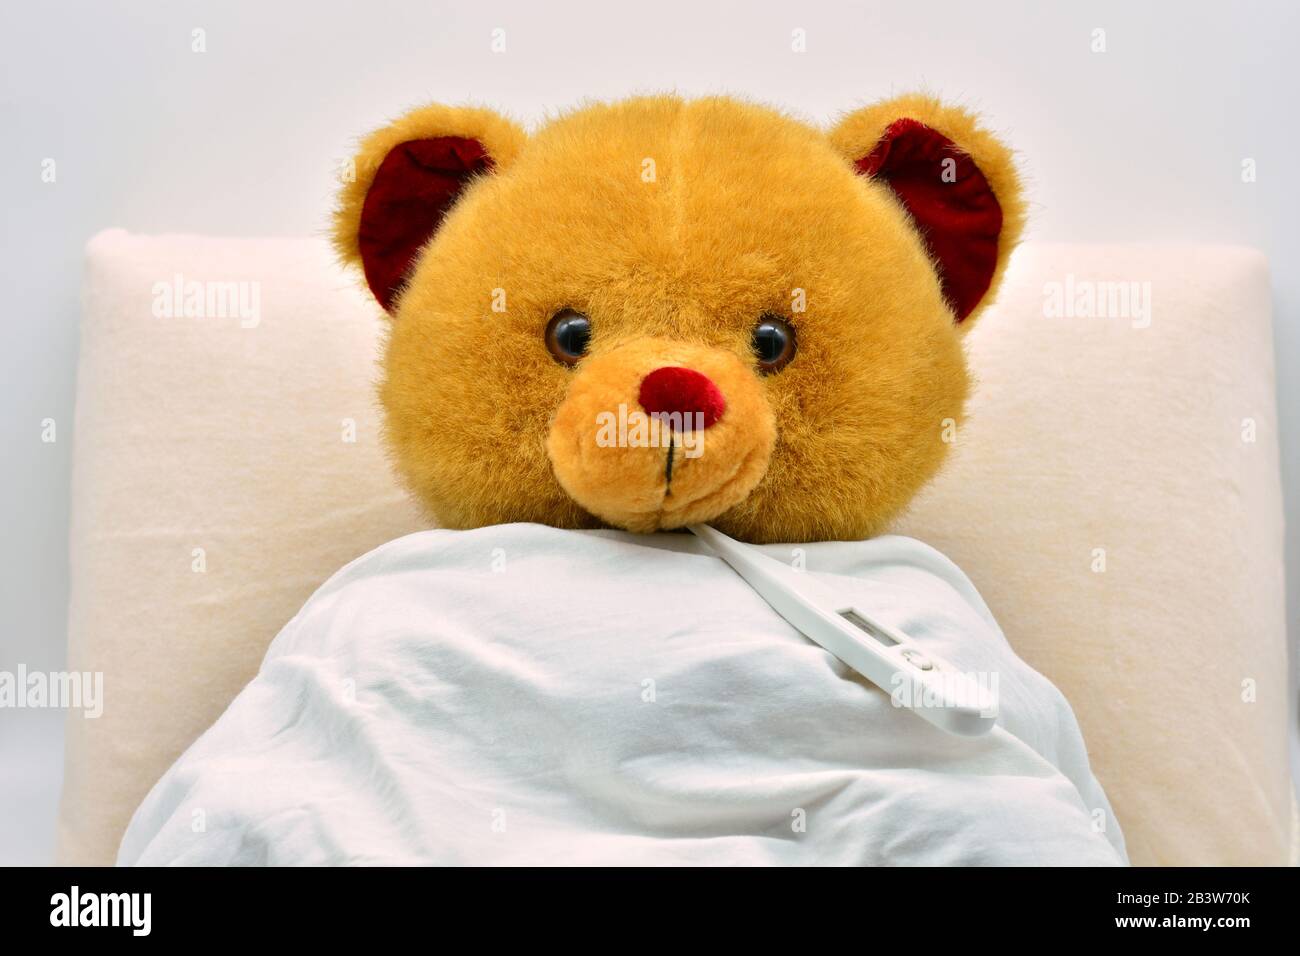 Teddy bear in bed, sick, with thermometer put in mouth Stock Photo